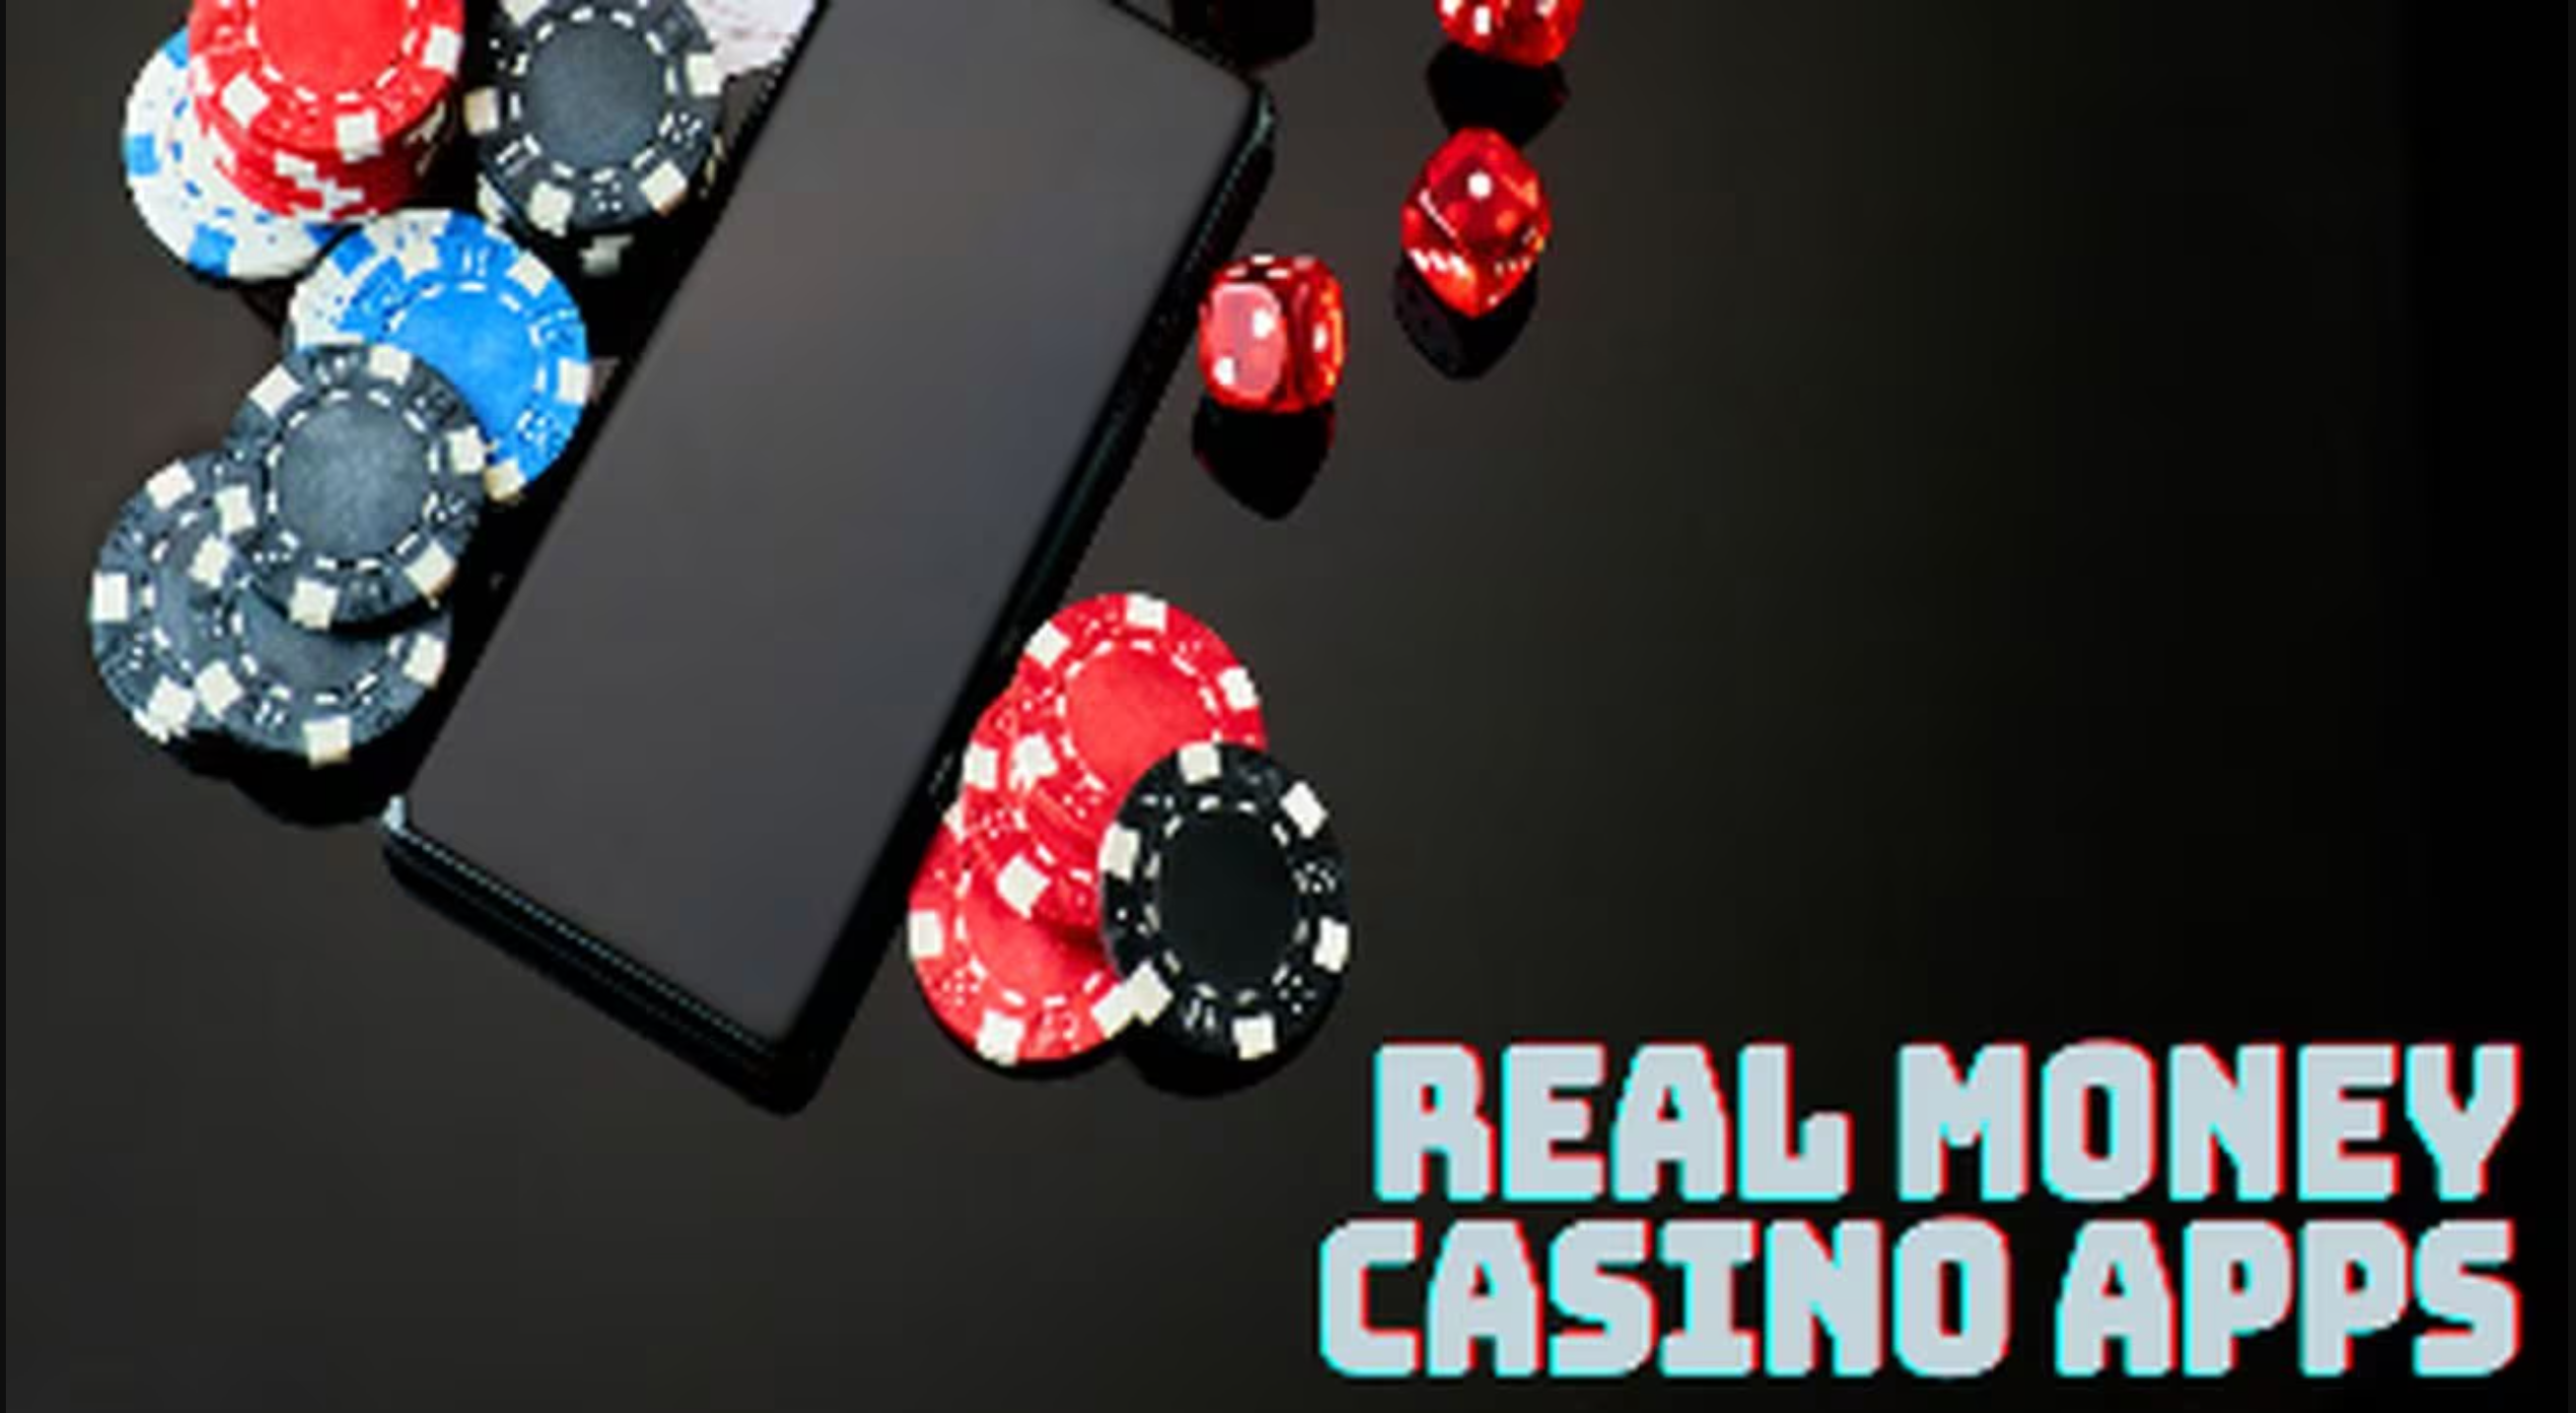 Best real money casino apps - which casino has the best app?